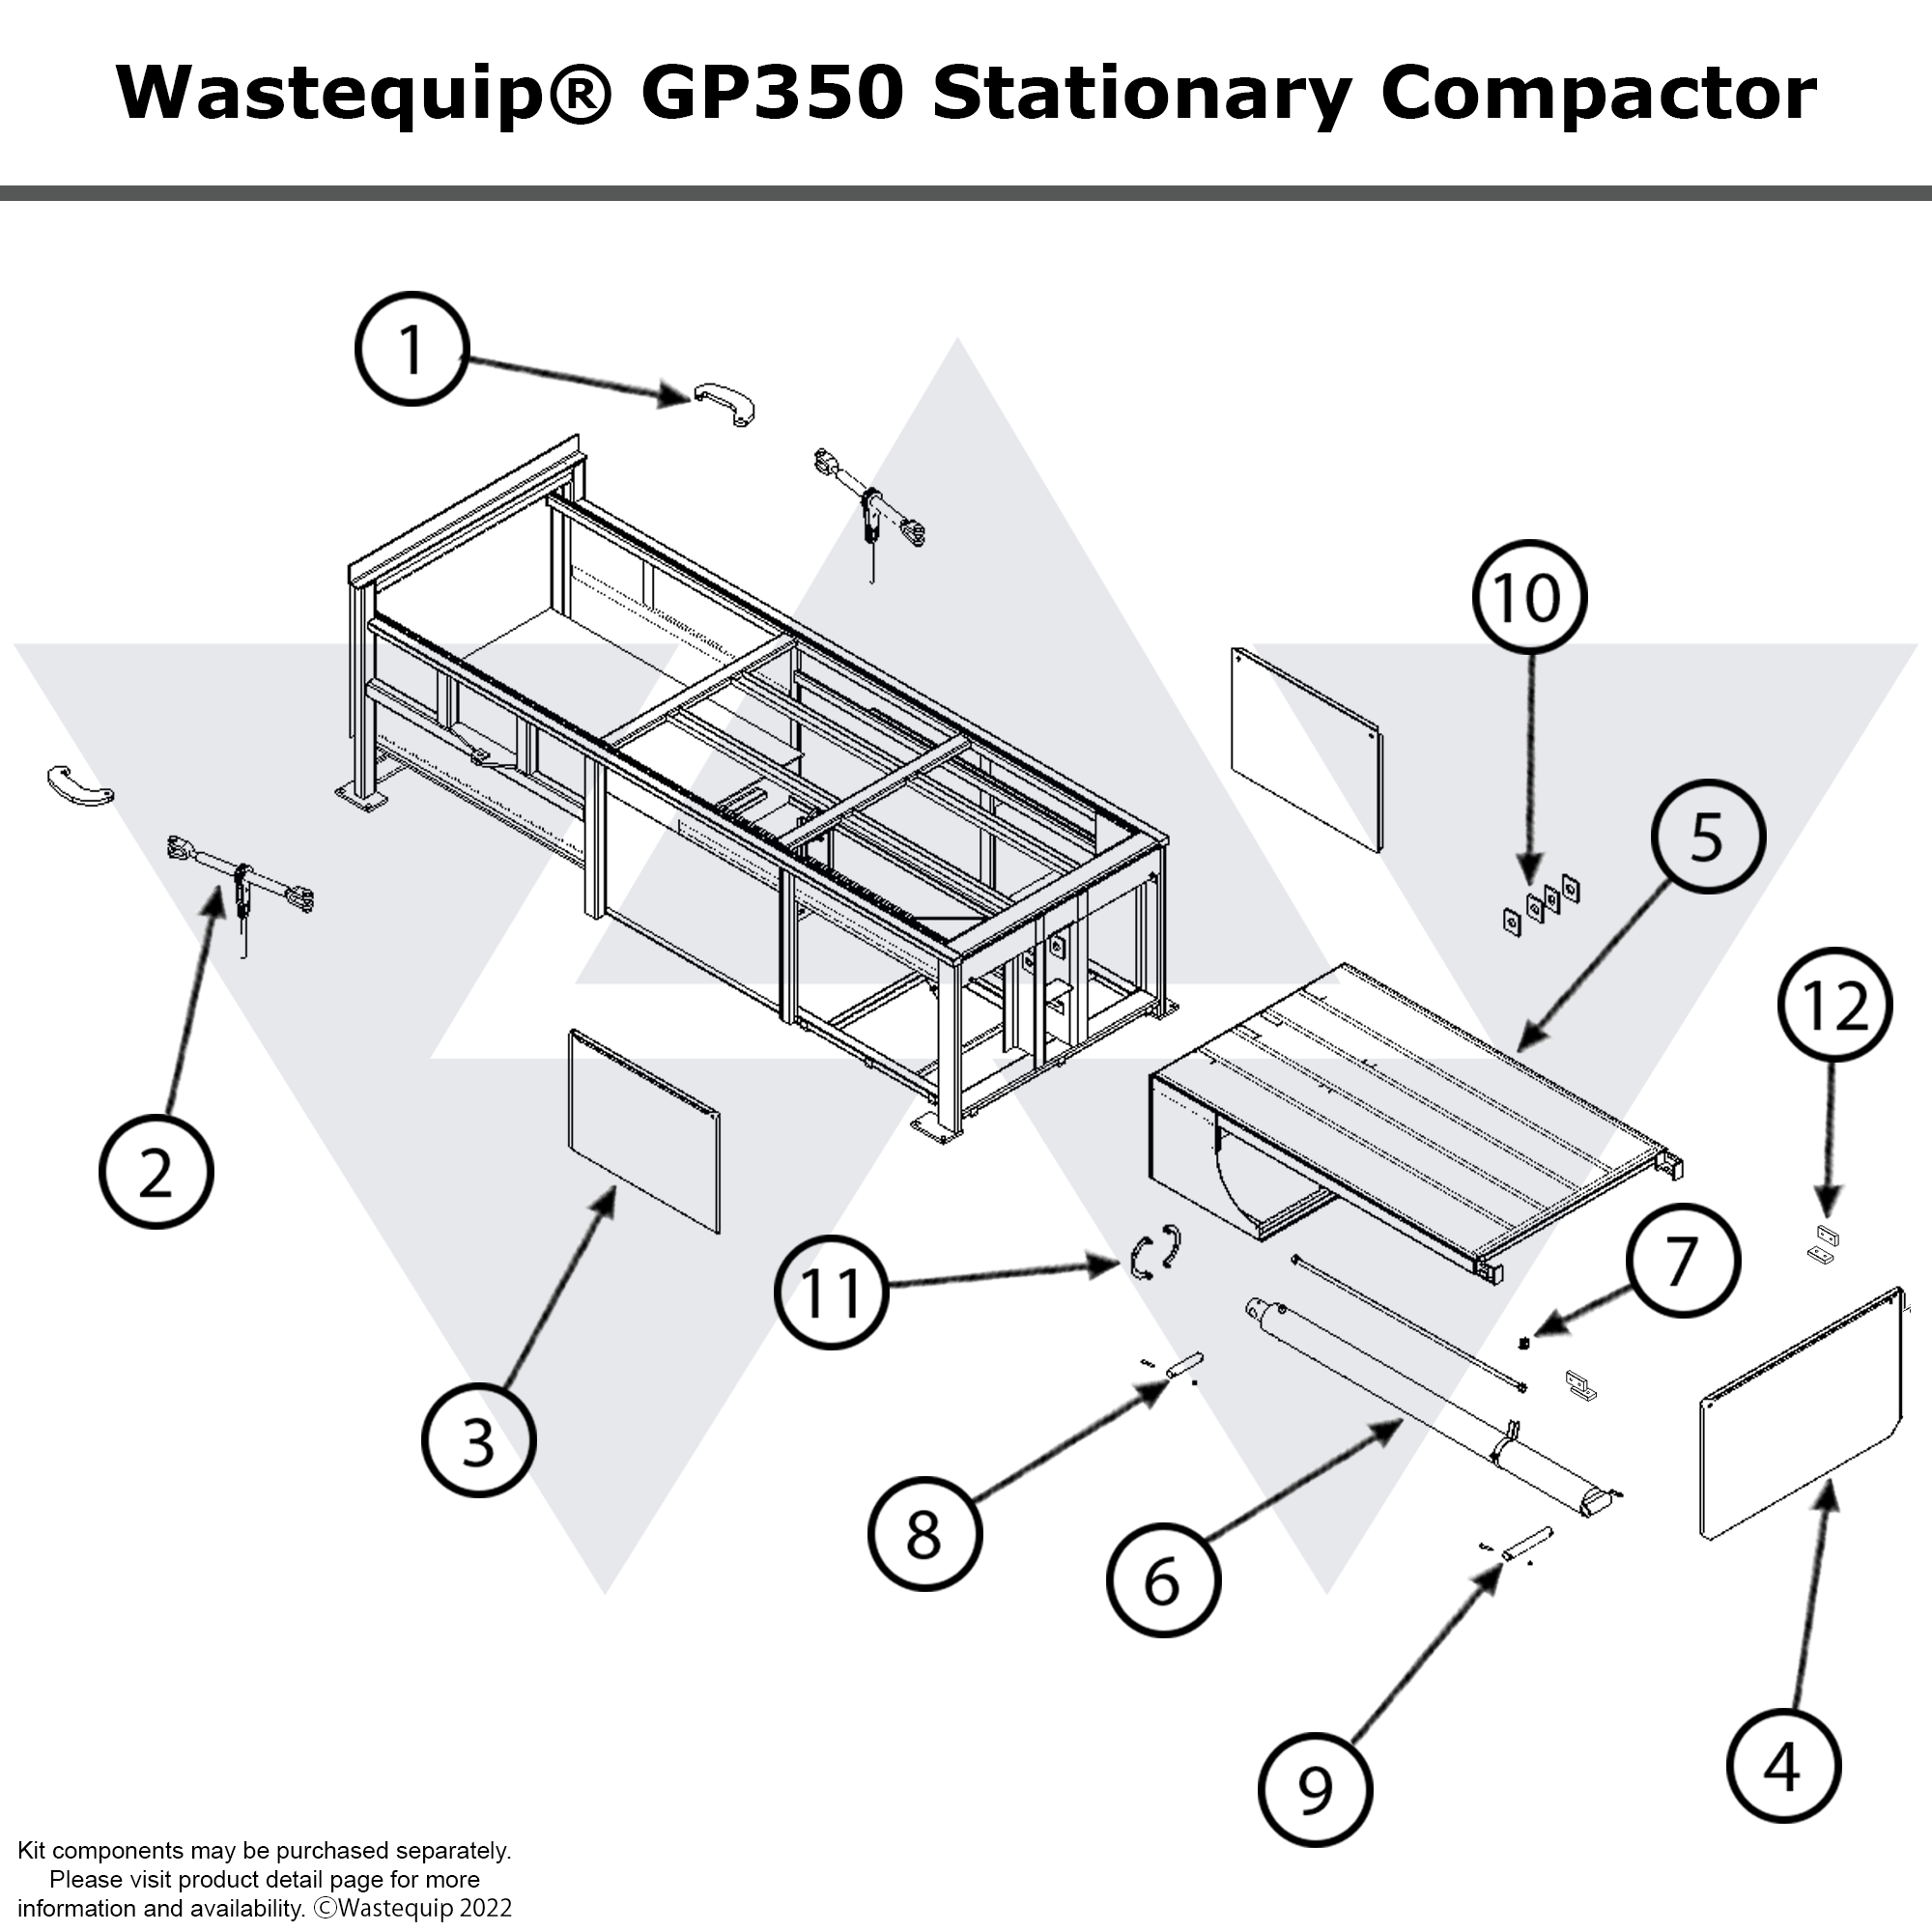 Wastequip® GP350 Stationary Compactor